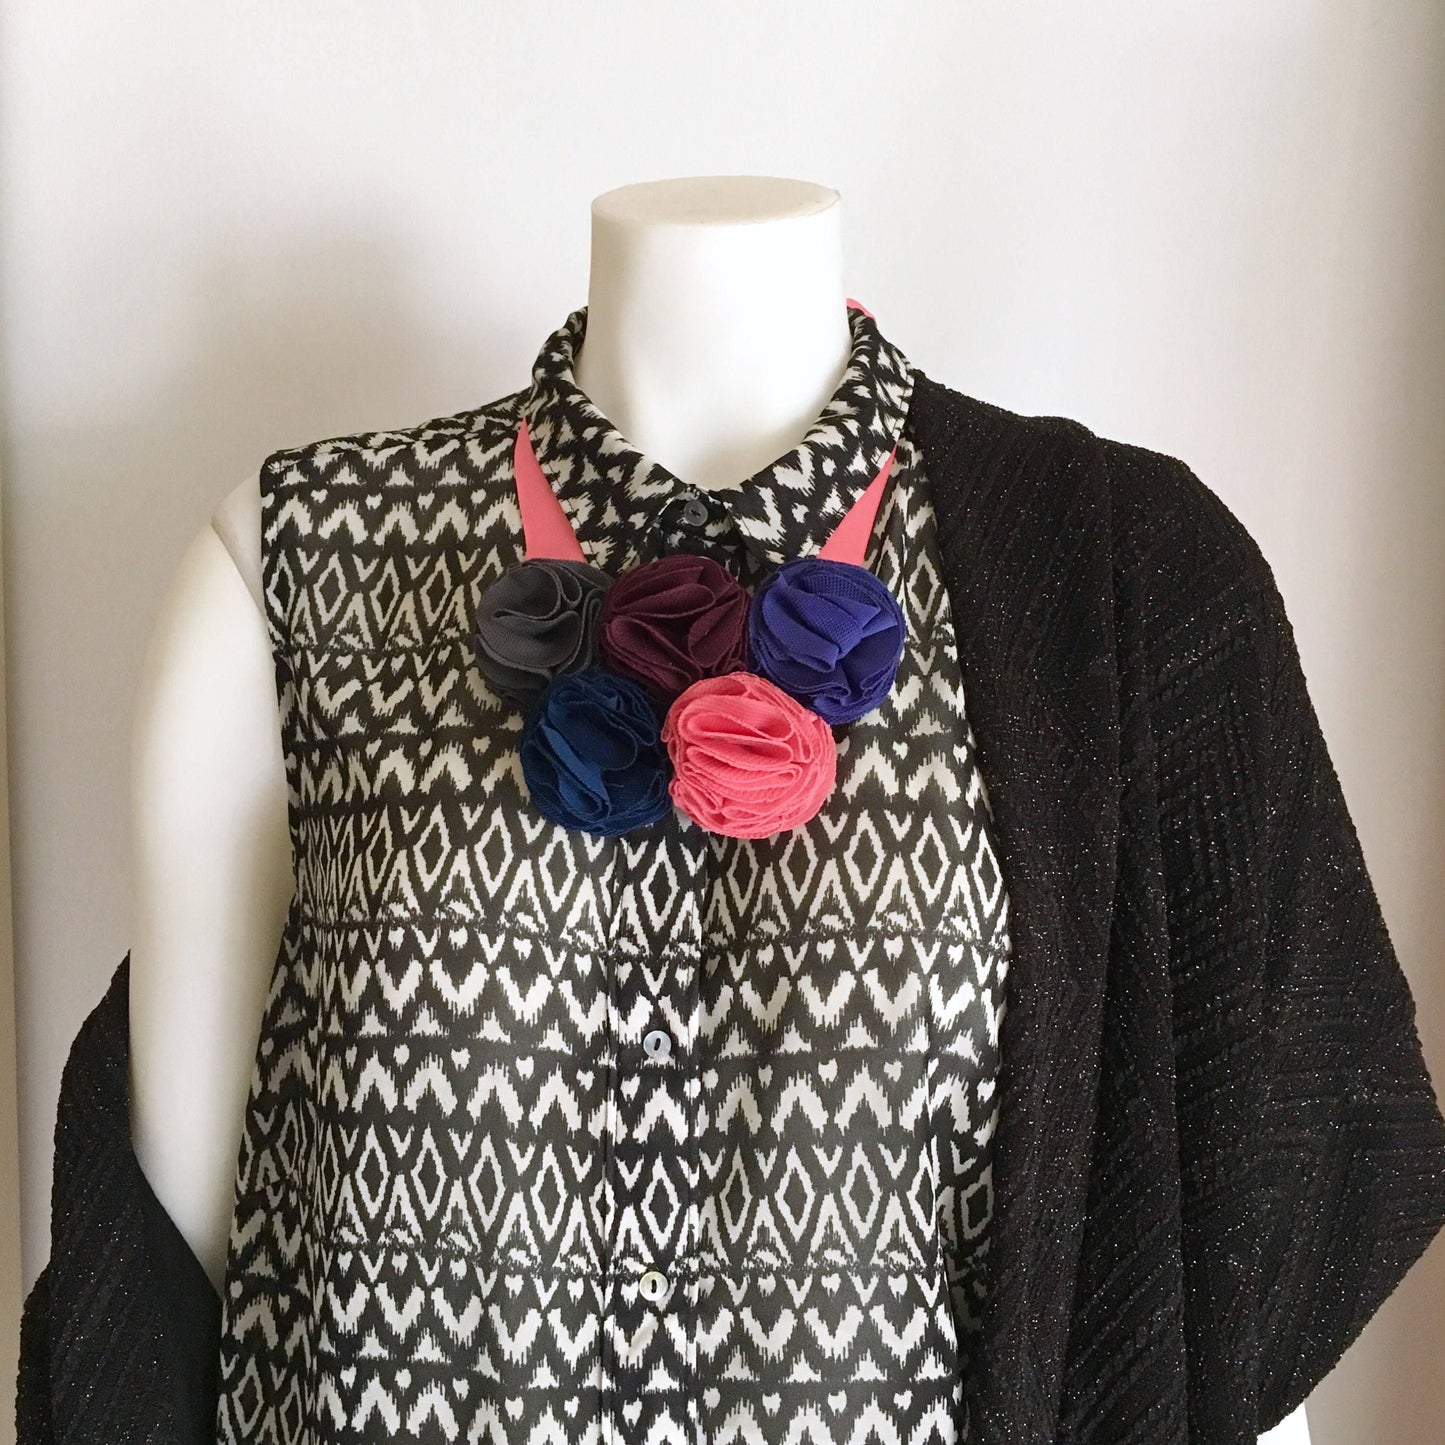 Floral Statement Necklace in Spring Mix